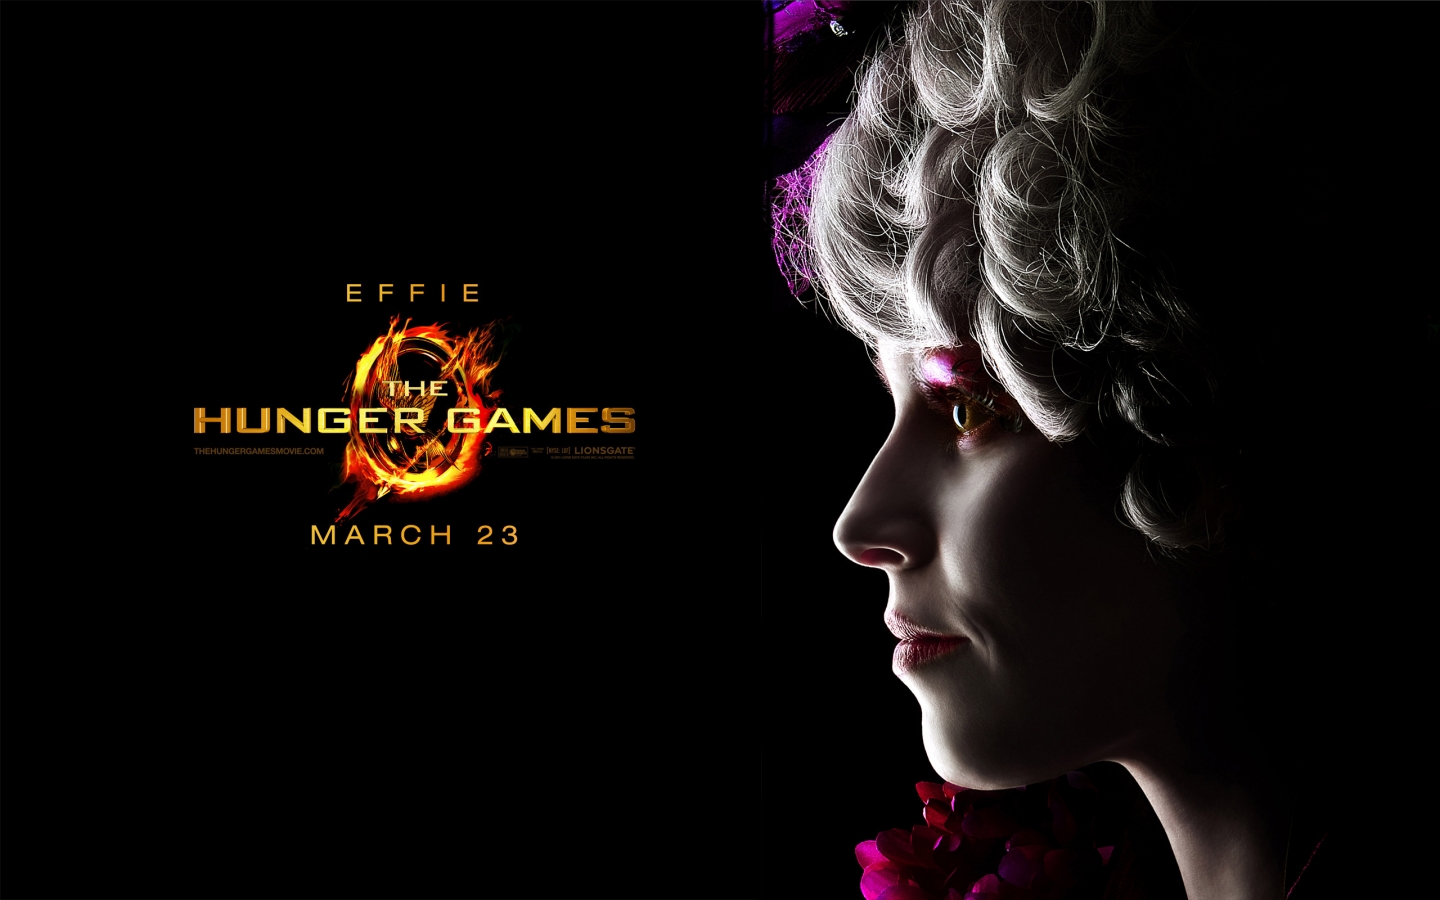 The Hunger Games Effie for 1440 x 900 widescreen resolution